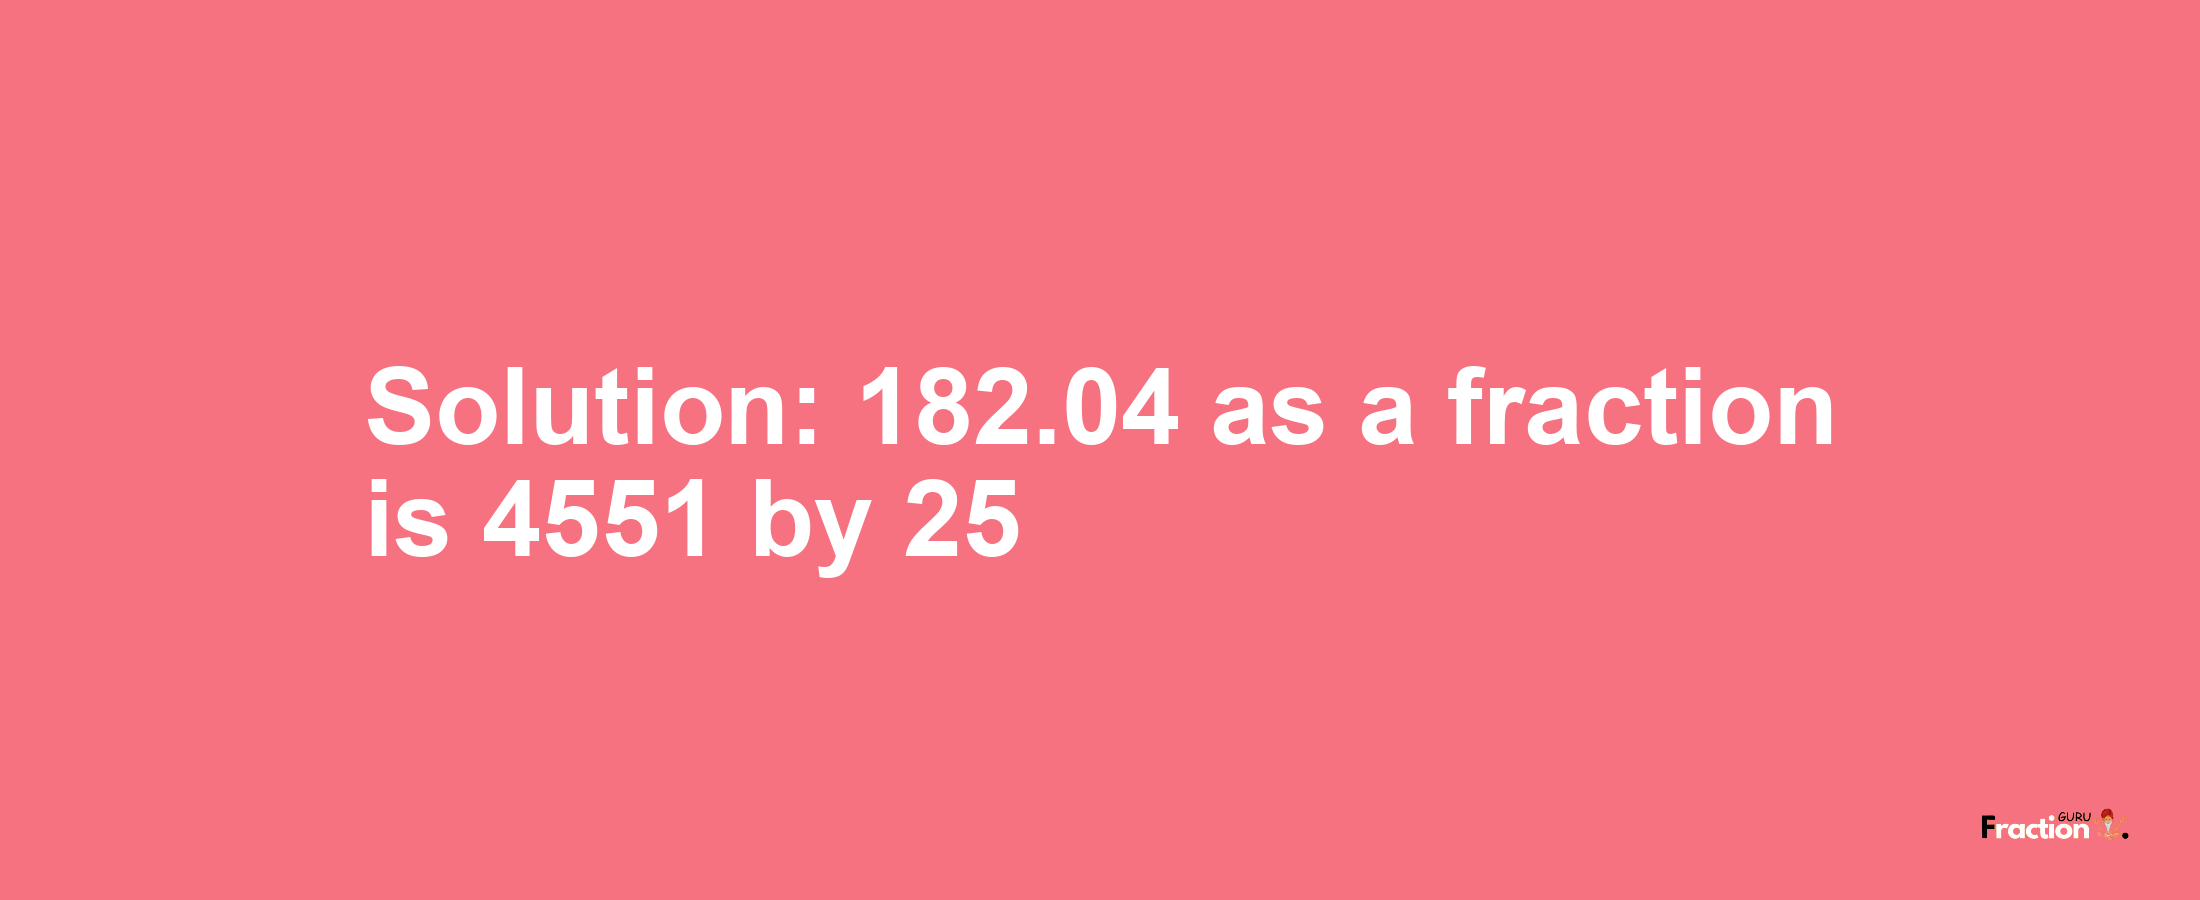 Solution:182.04 as a fraction is 4551/25